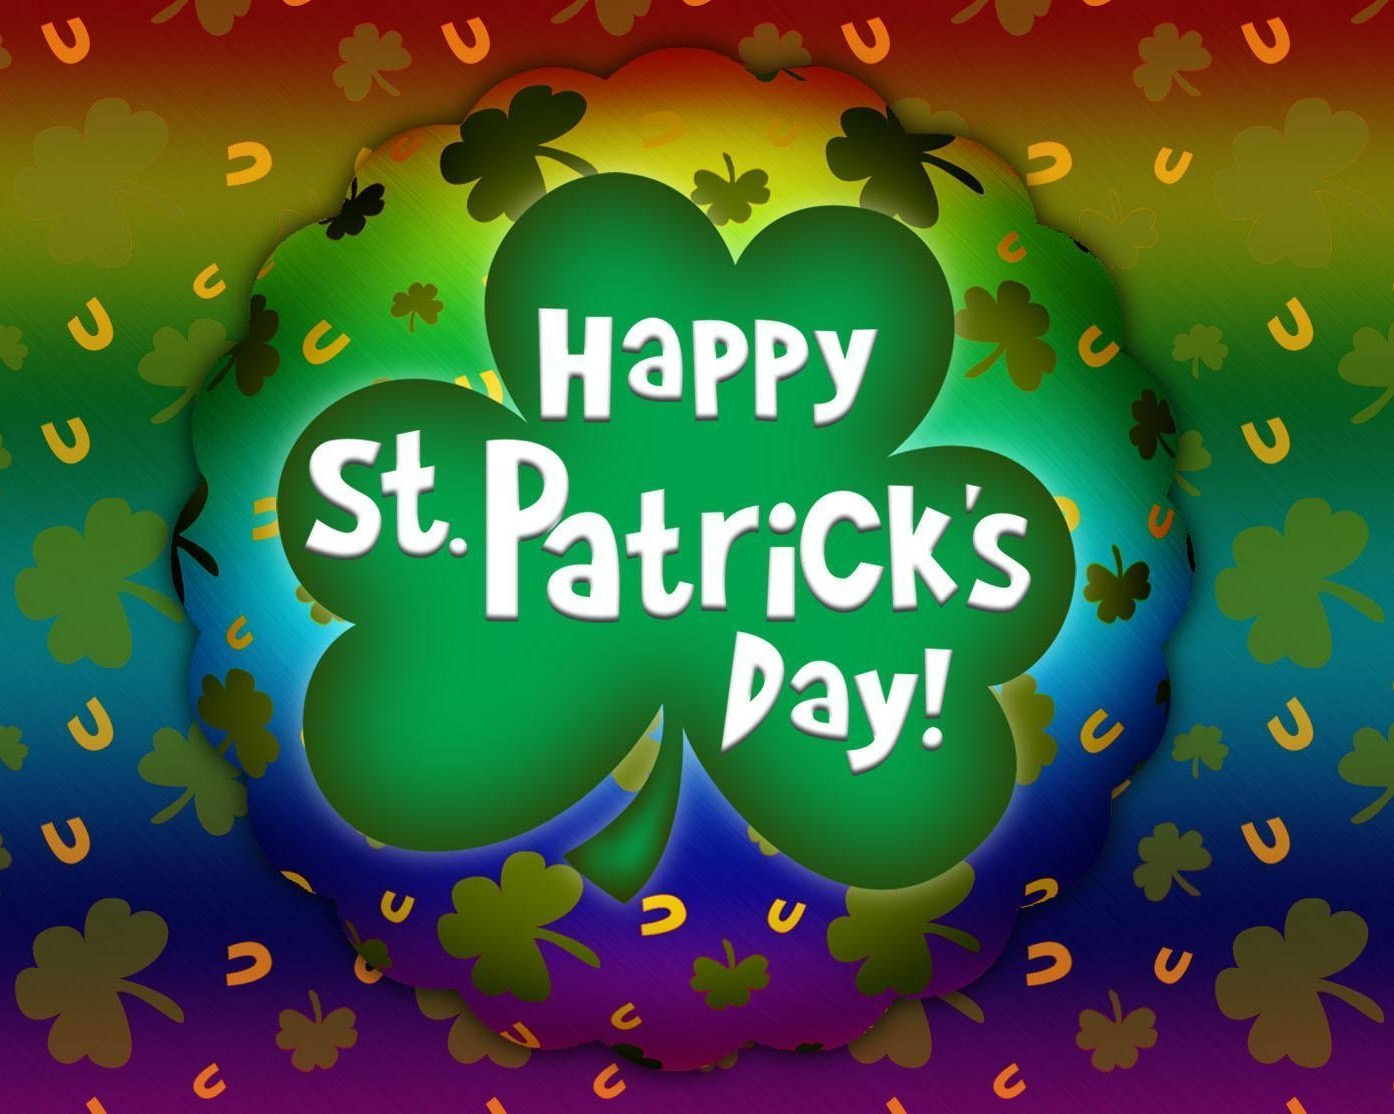 Saint Patrick's Day Quotes
 Happy St Patrick s Day 2019 Quotes Wishes Messages Sayings